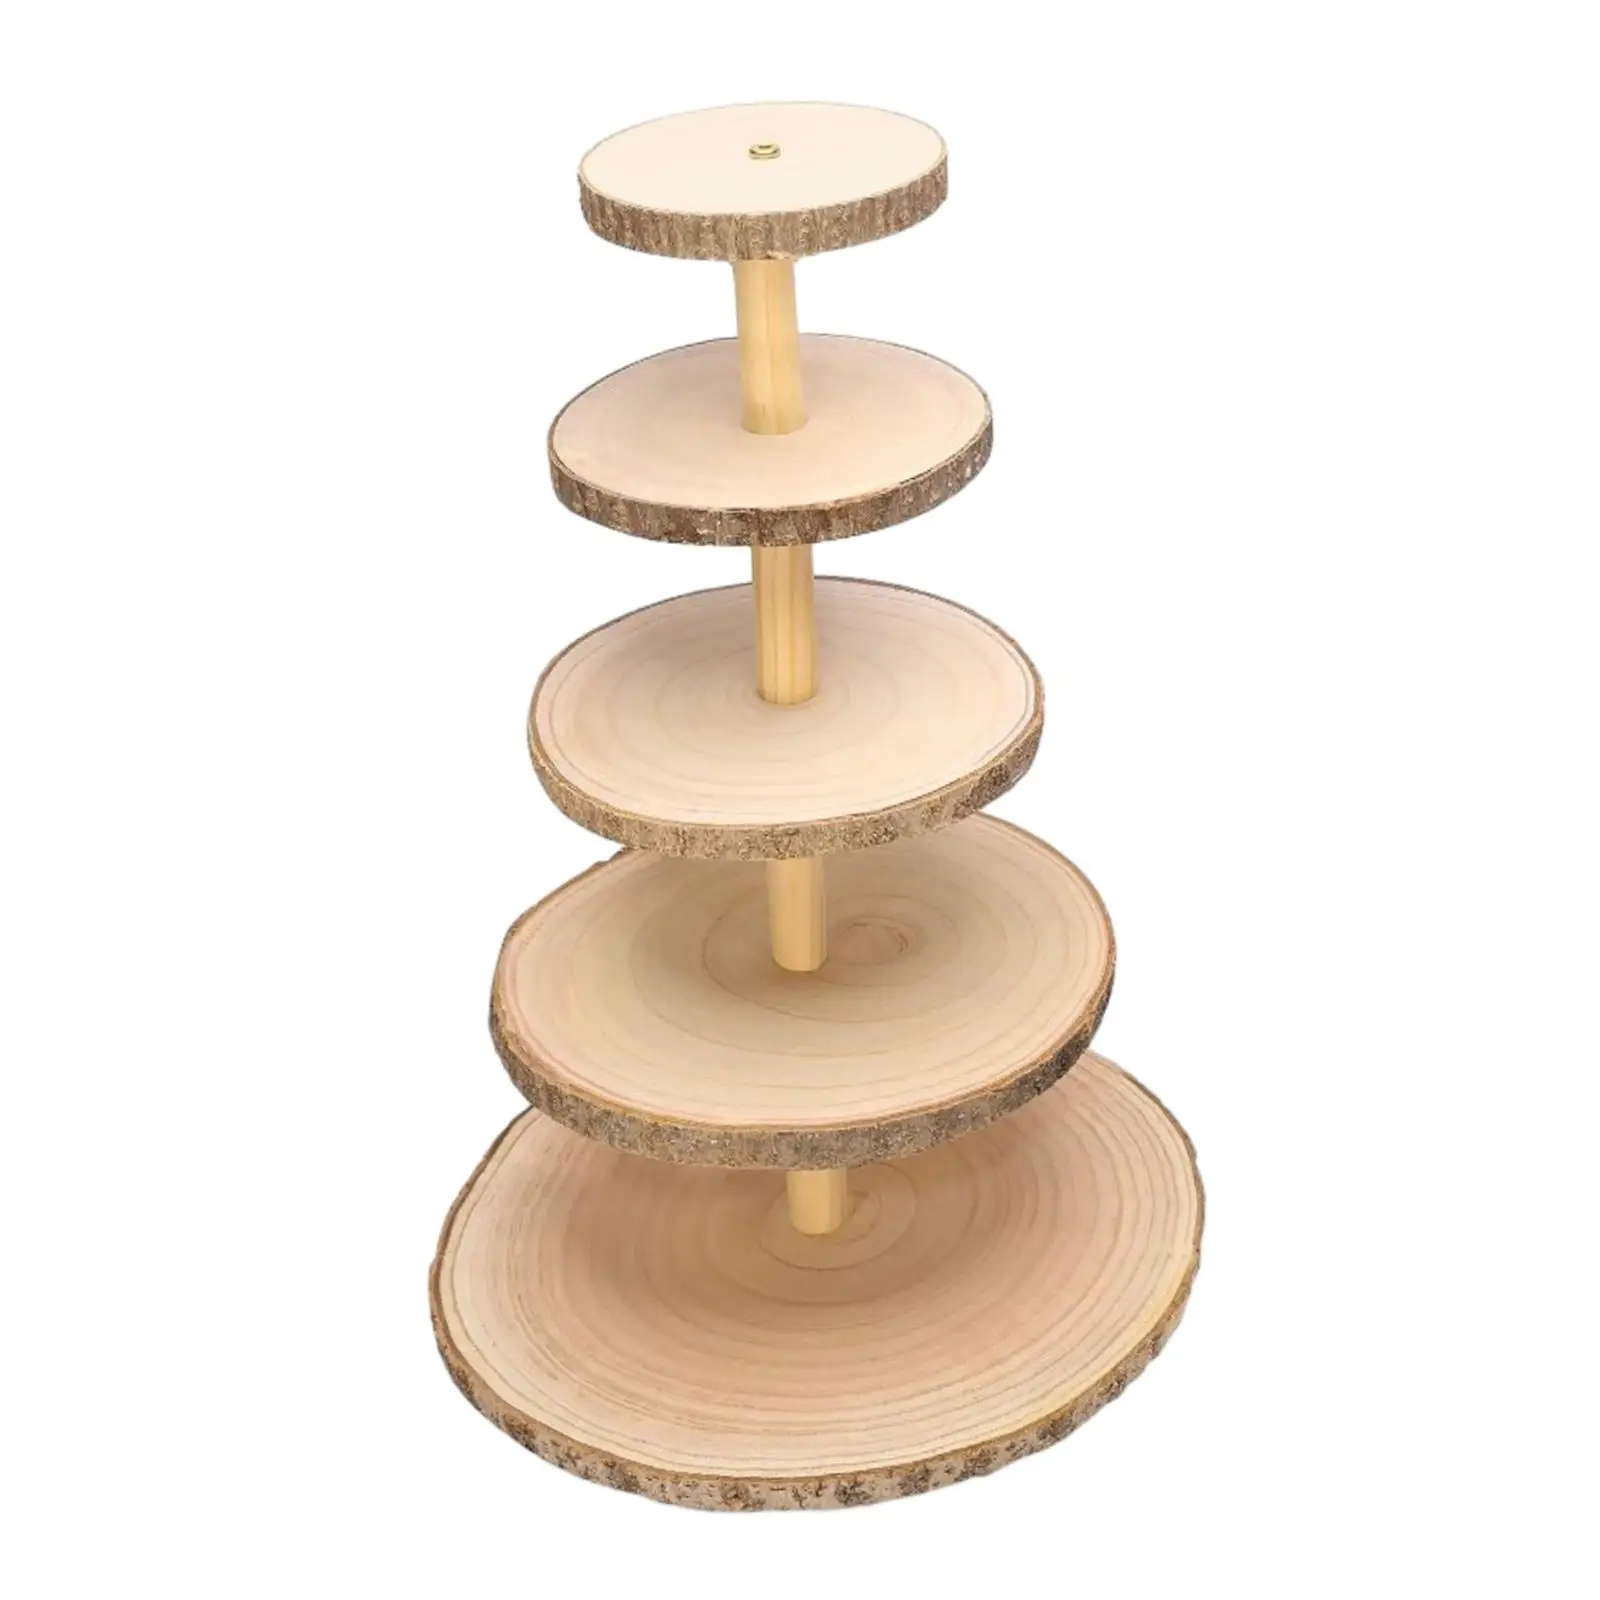 Wood Cupcake Stand Holder Detachable Wood Slices Round Cupcake Holder for Wedding Centerpiece Home Party Presenting Crafts